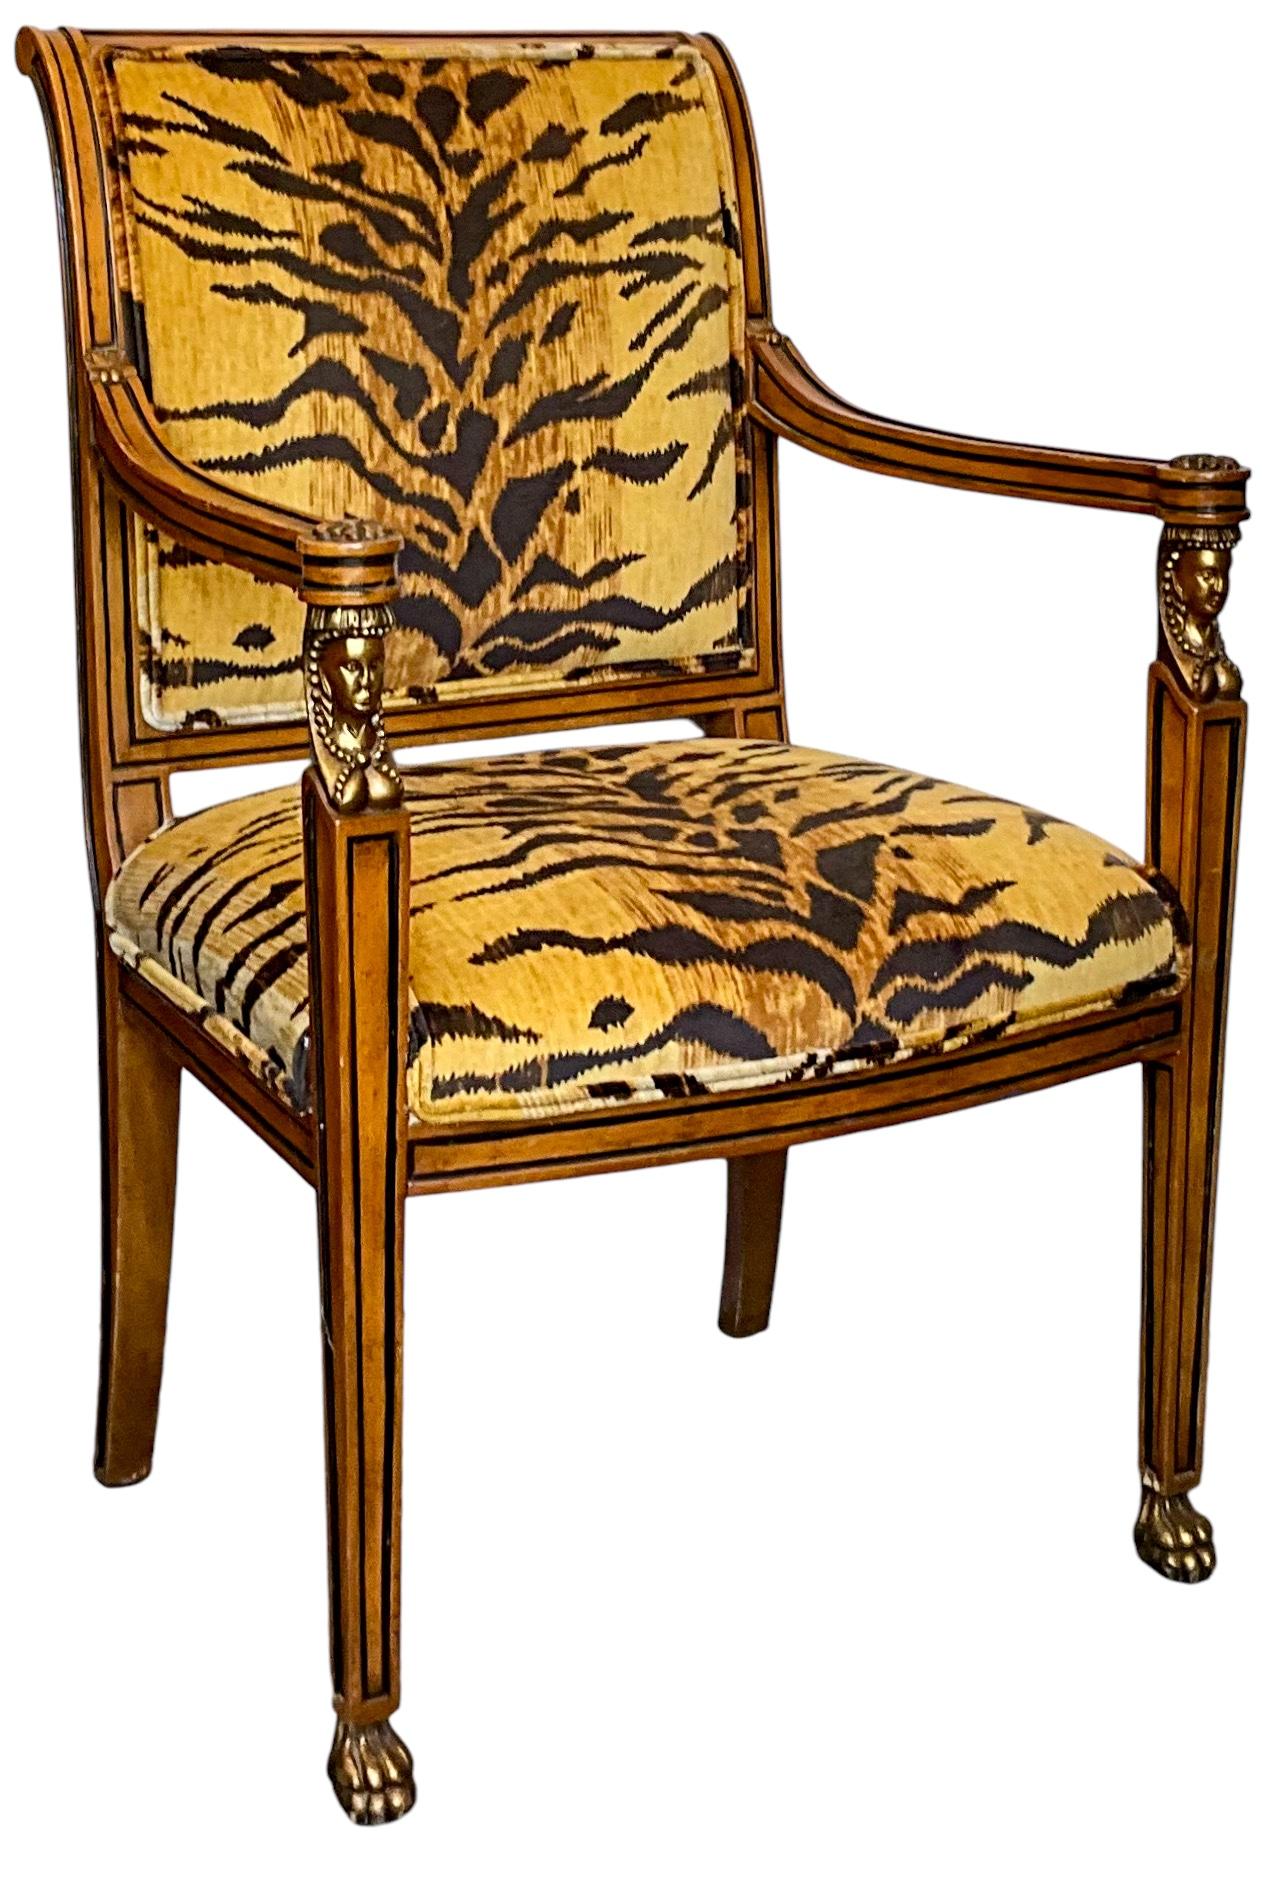 Early 20th-C. Egyptian Revival Style Bergere Chairs In Tiger Velvet - Pair In Good Condition For Sale In Kennesaw, GA